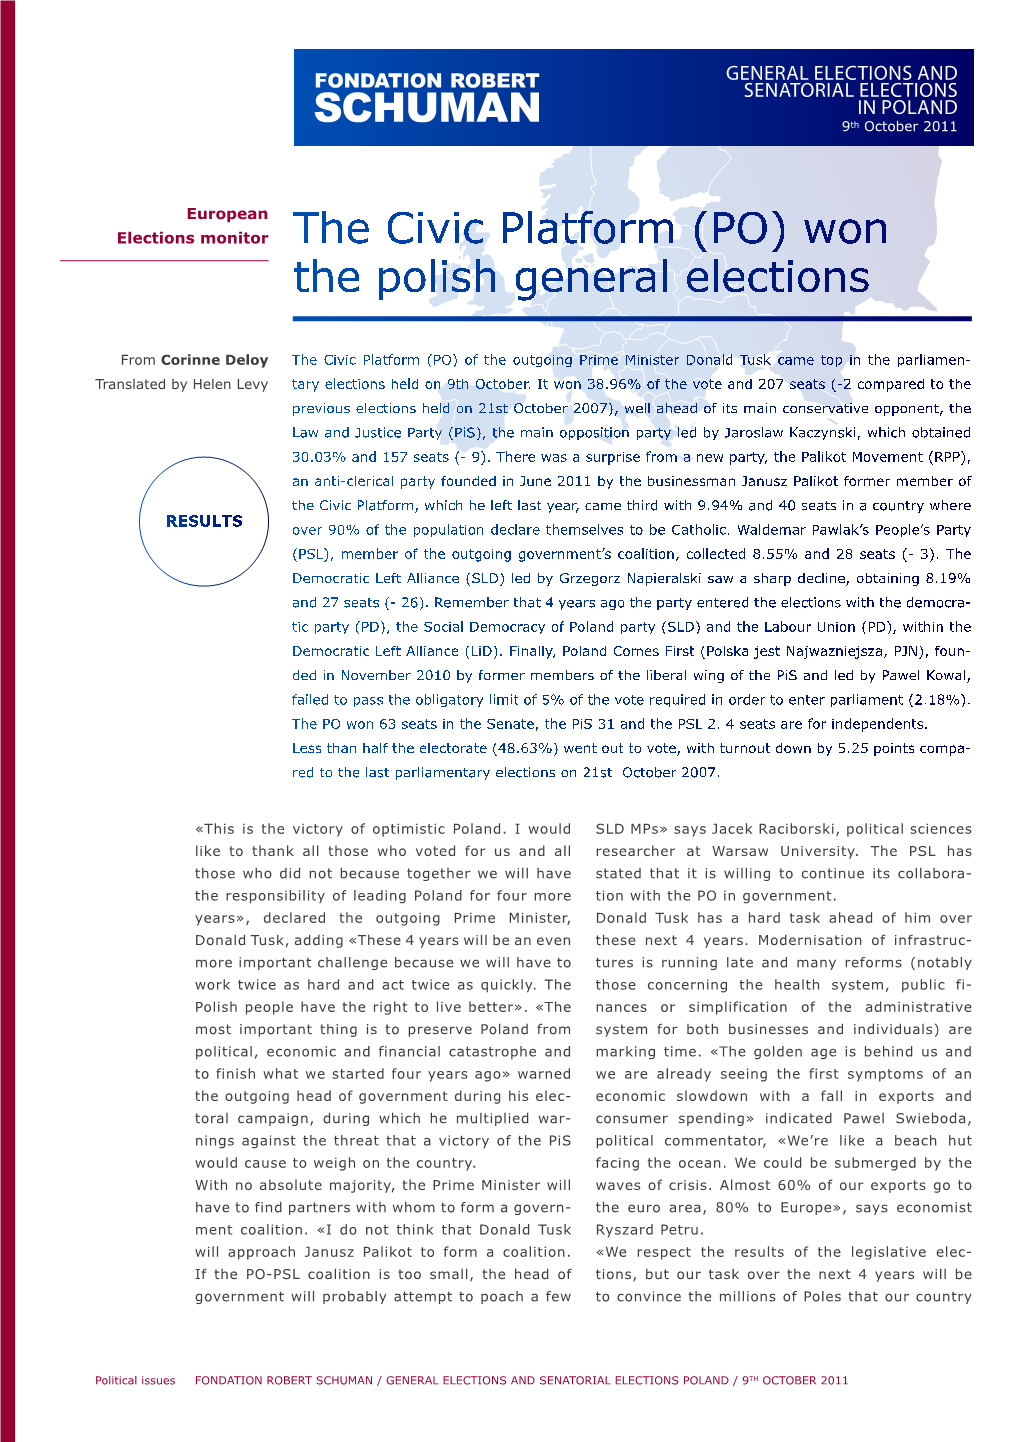 GENERAL ELECTIONS and SENATORIAL ELECTIONS in POLAND 9Th October 2011